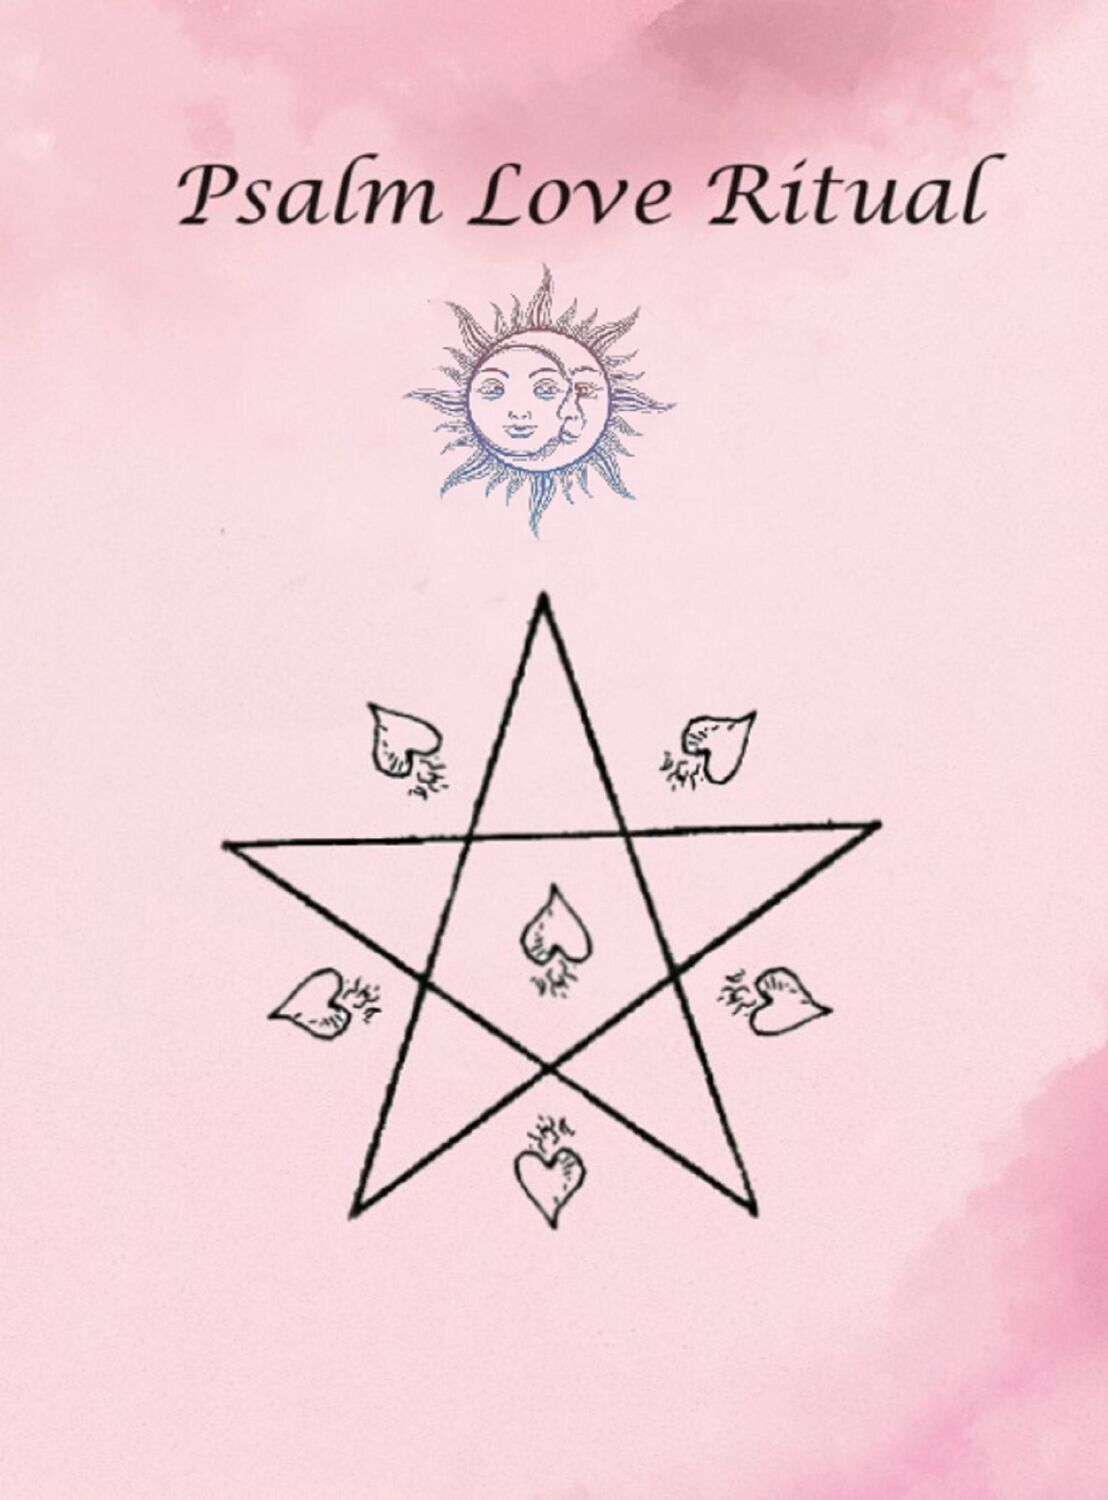 Love spell ritual, psalm magick, bring back lost love witchcraft